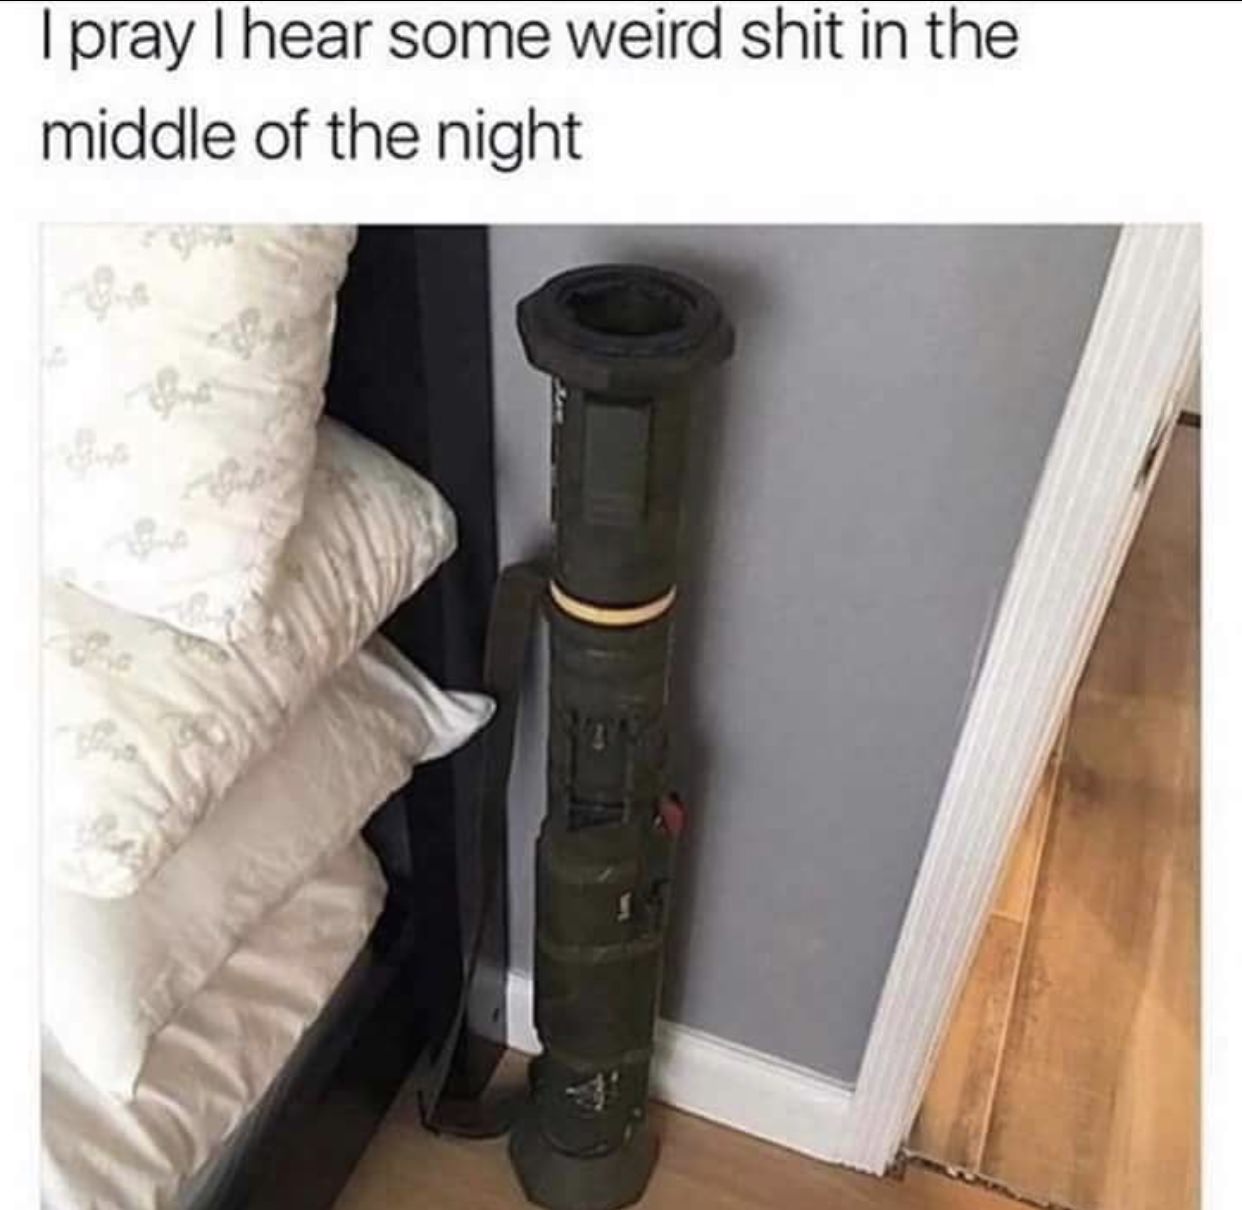 pray i hear some weird shit - I pray I hear some weird shit in the middle of the night